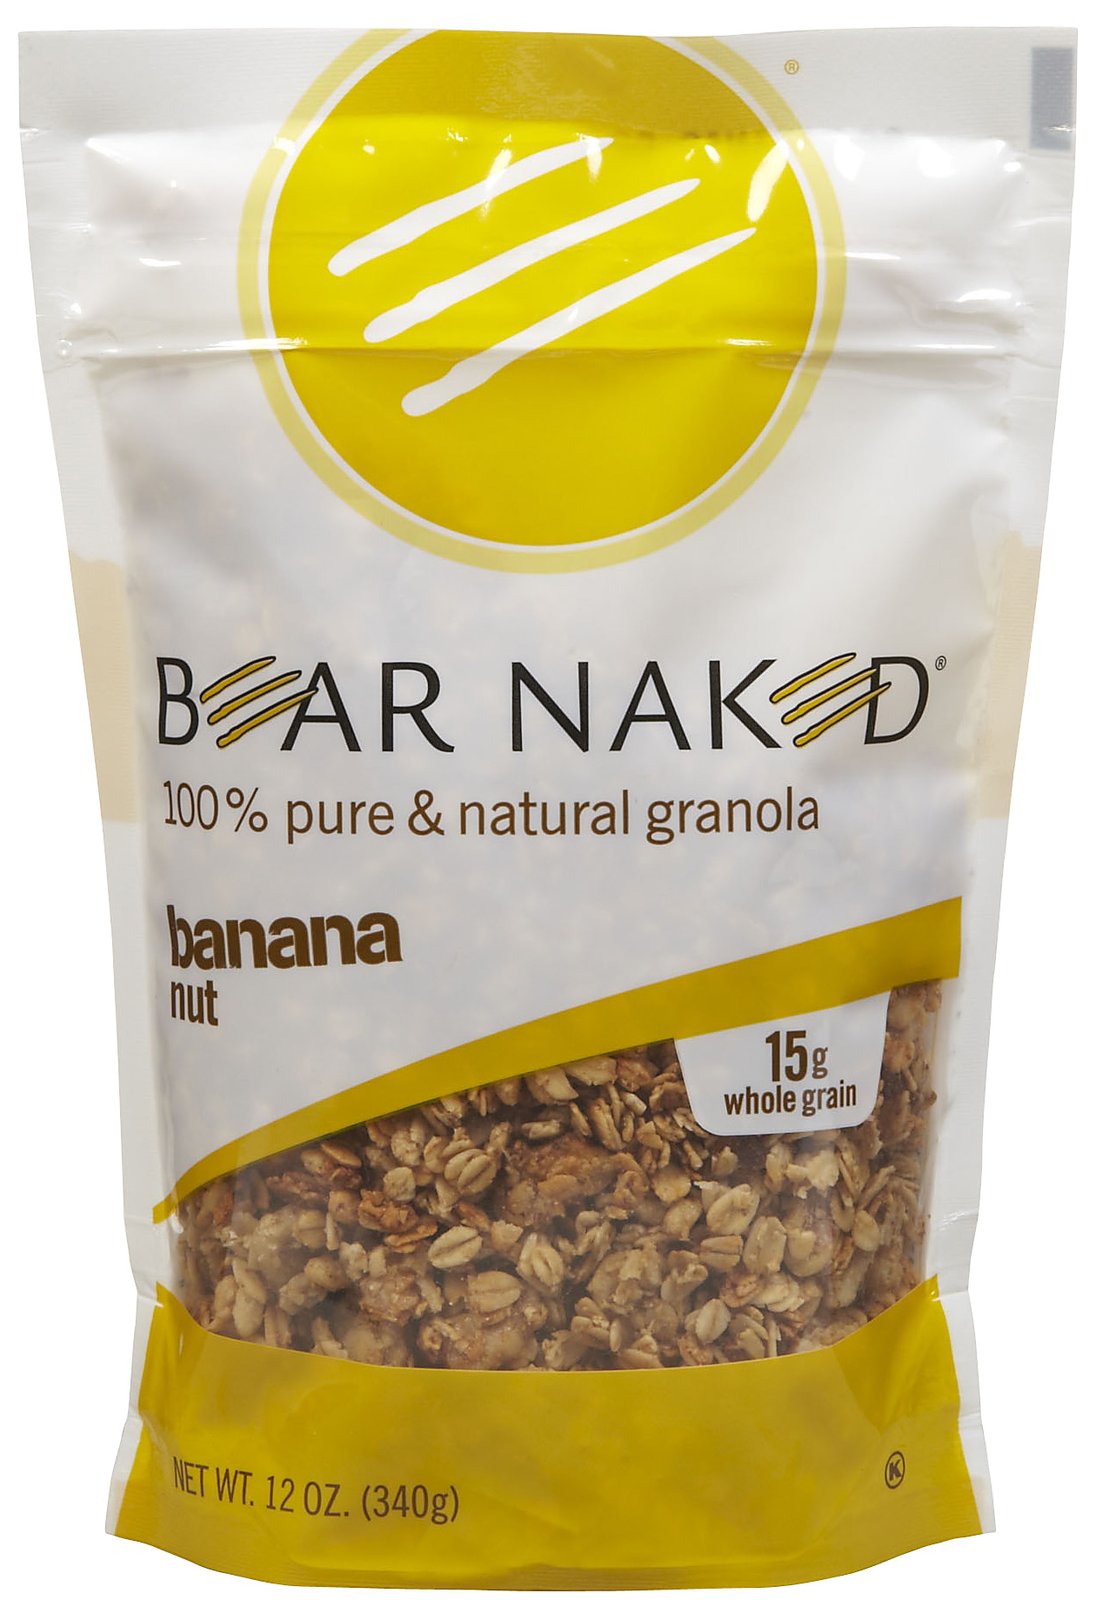 Bear Naked Granola 3-Pack from $7.87 Shipped on Amazon 